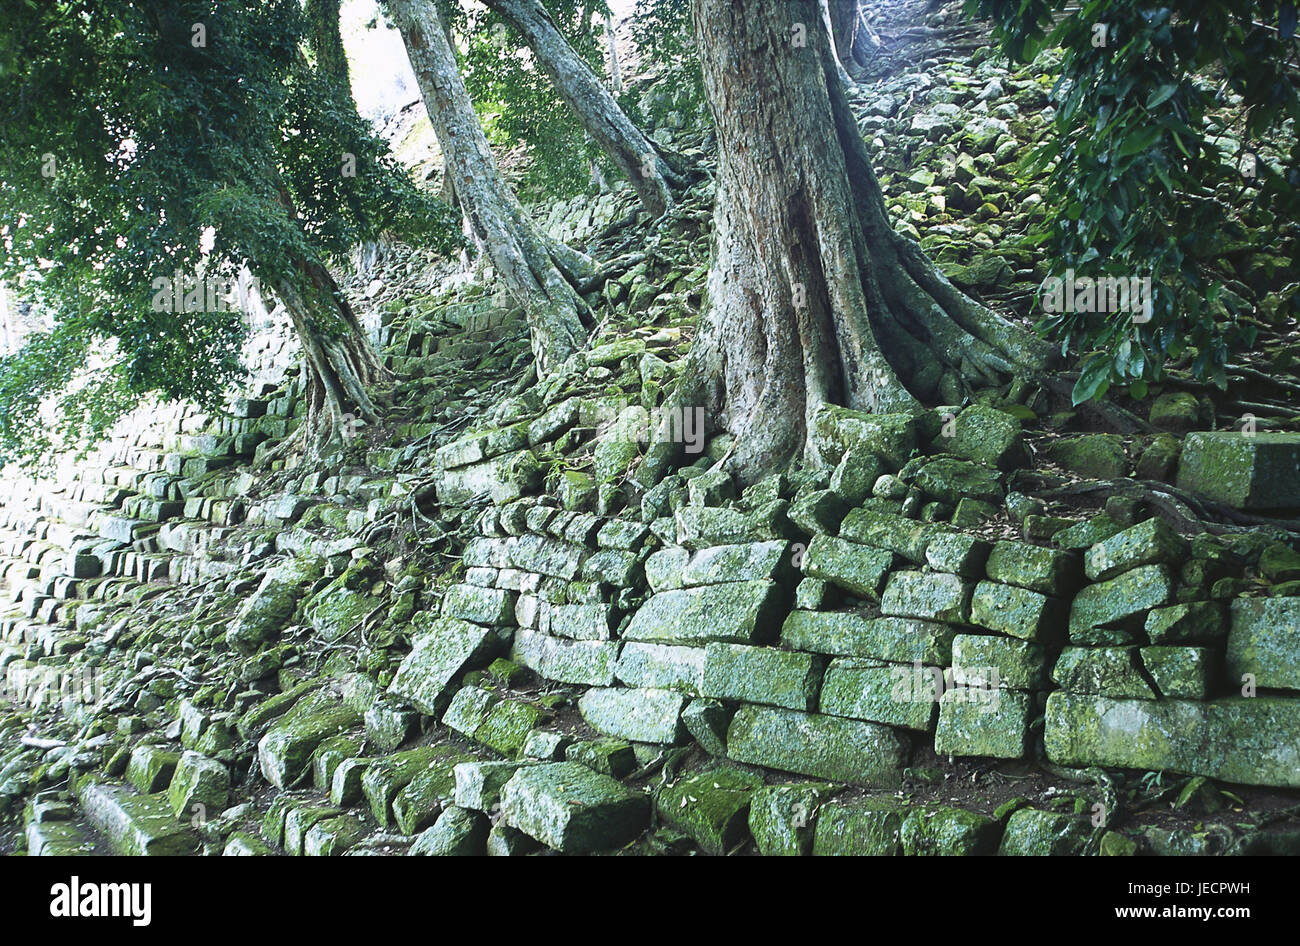 Honduras, Copan, temple, ruin, trunks, detail, Central America, Latin America, destination, place of interest, culture, to cultural rice, remains, Maya, Maya's site, excavations, UNESCO-world cultural heritage, architecture, outside, deserted, red bricks, plants, roots, primeval forest, Stock Photo